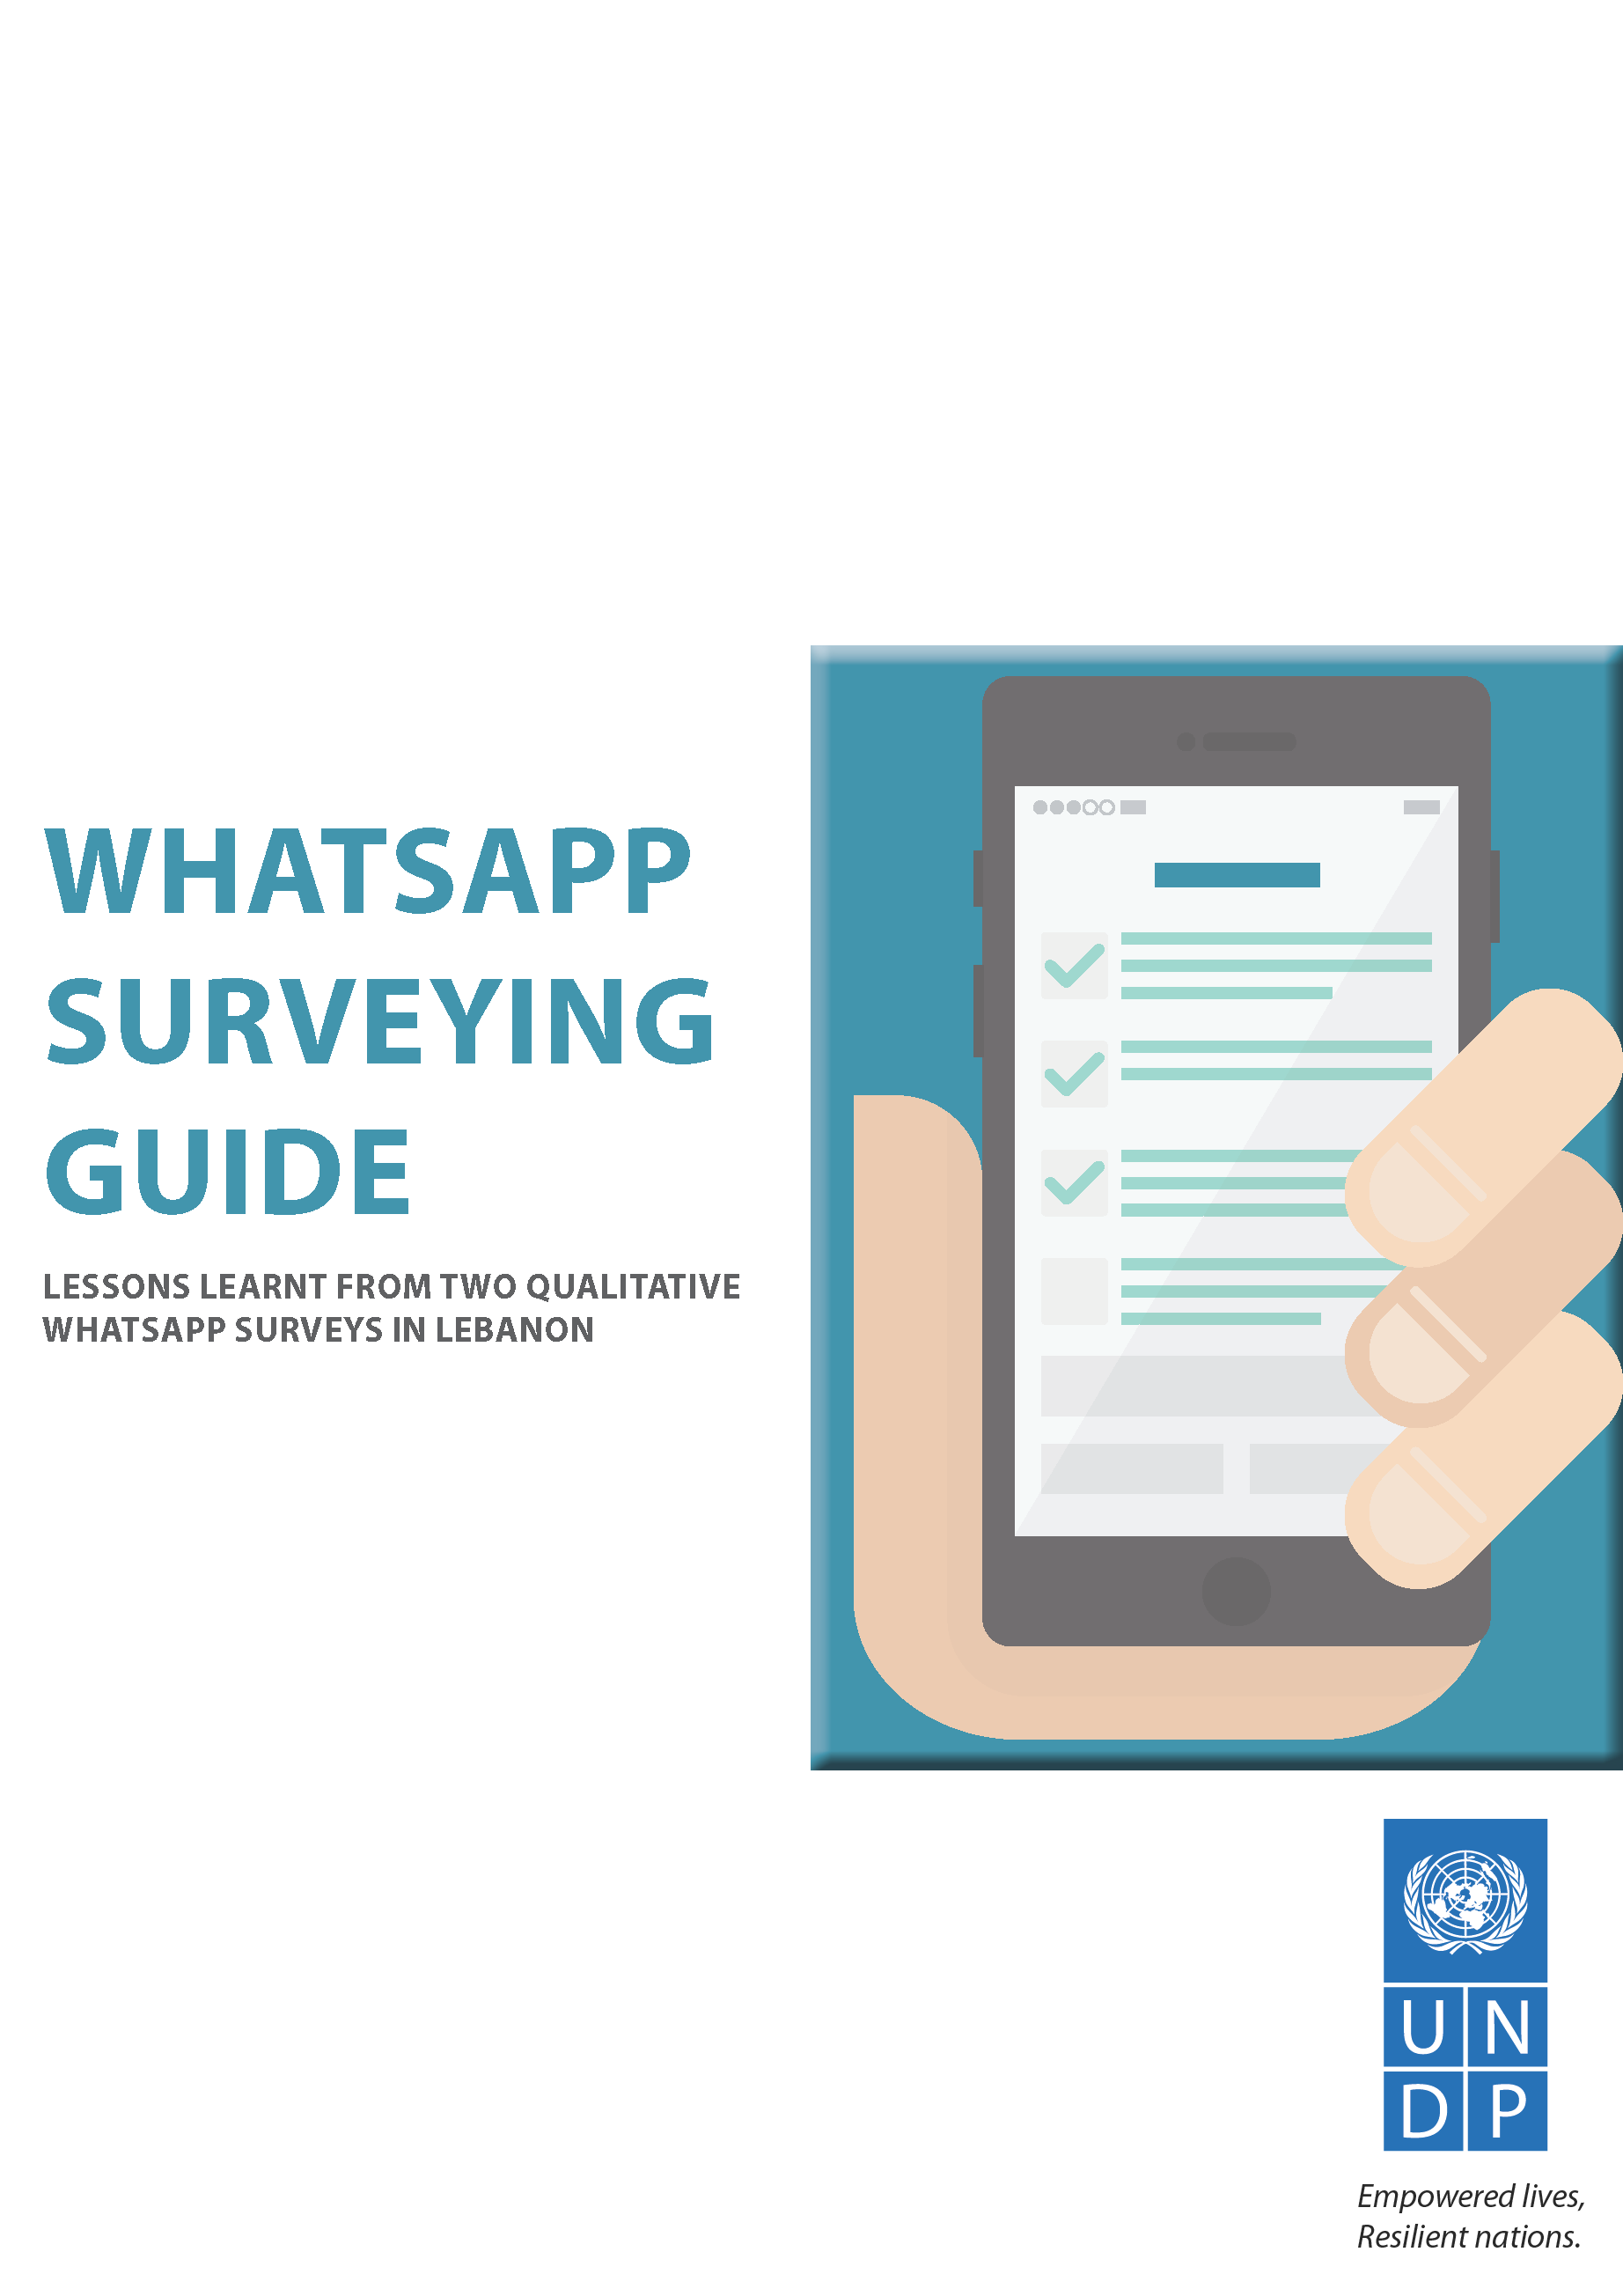 Cover page for UNDP Innovation 'Speak up via WhatsApp' Project - WhatsApp Guide book